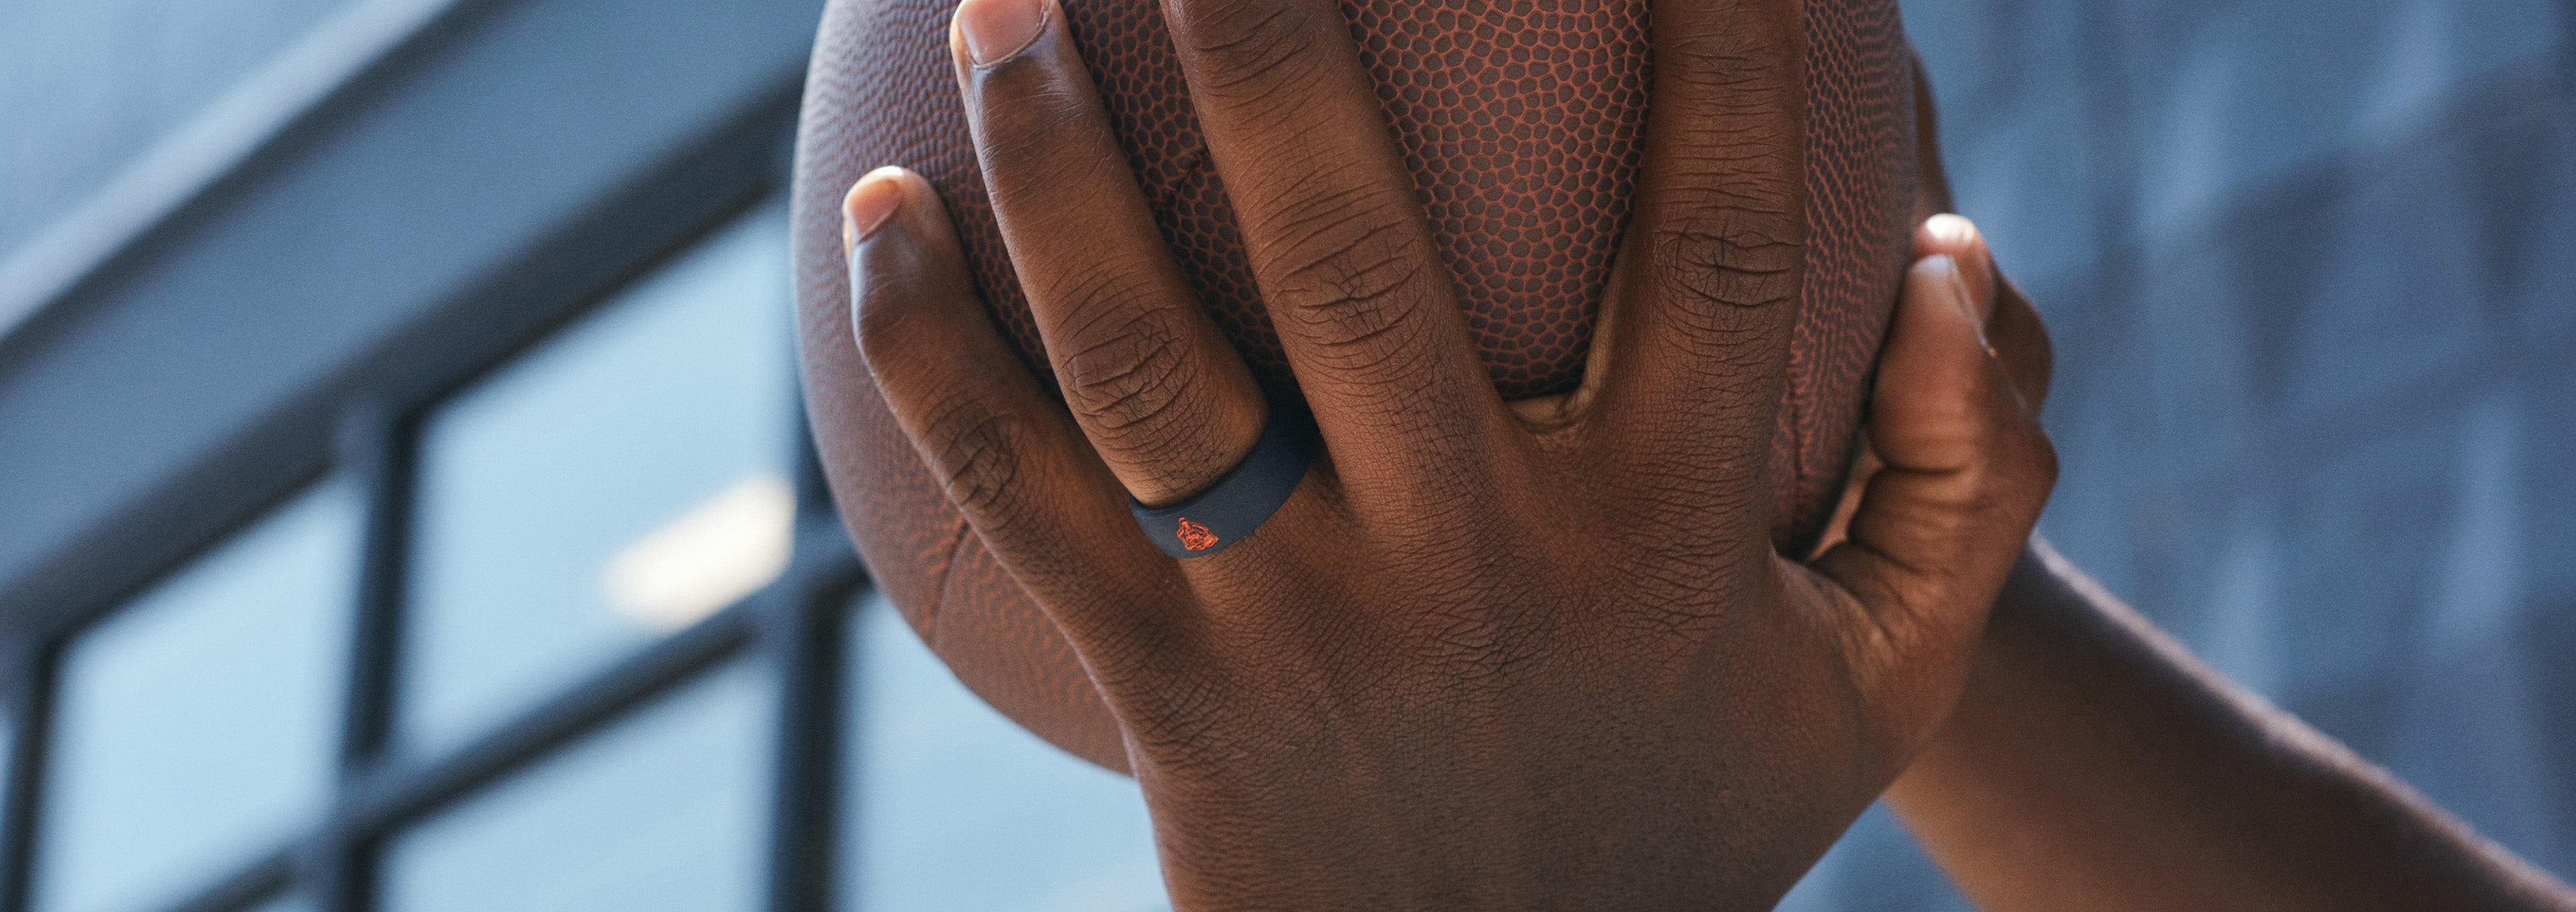 NFL Tennessee Titans Black Ring lifestyle image 3